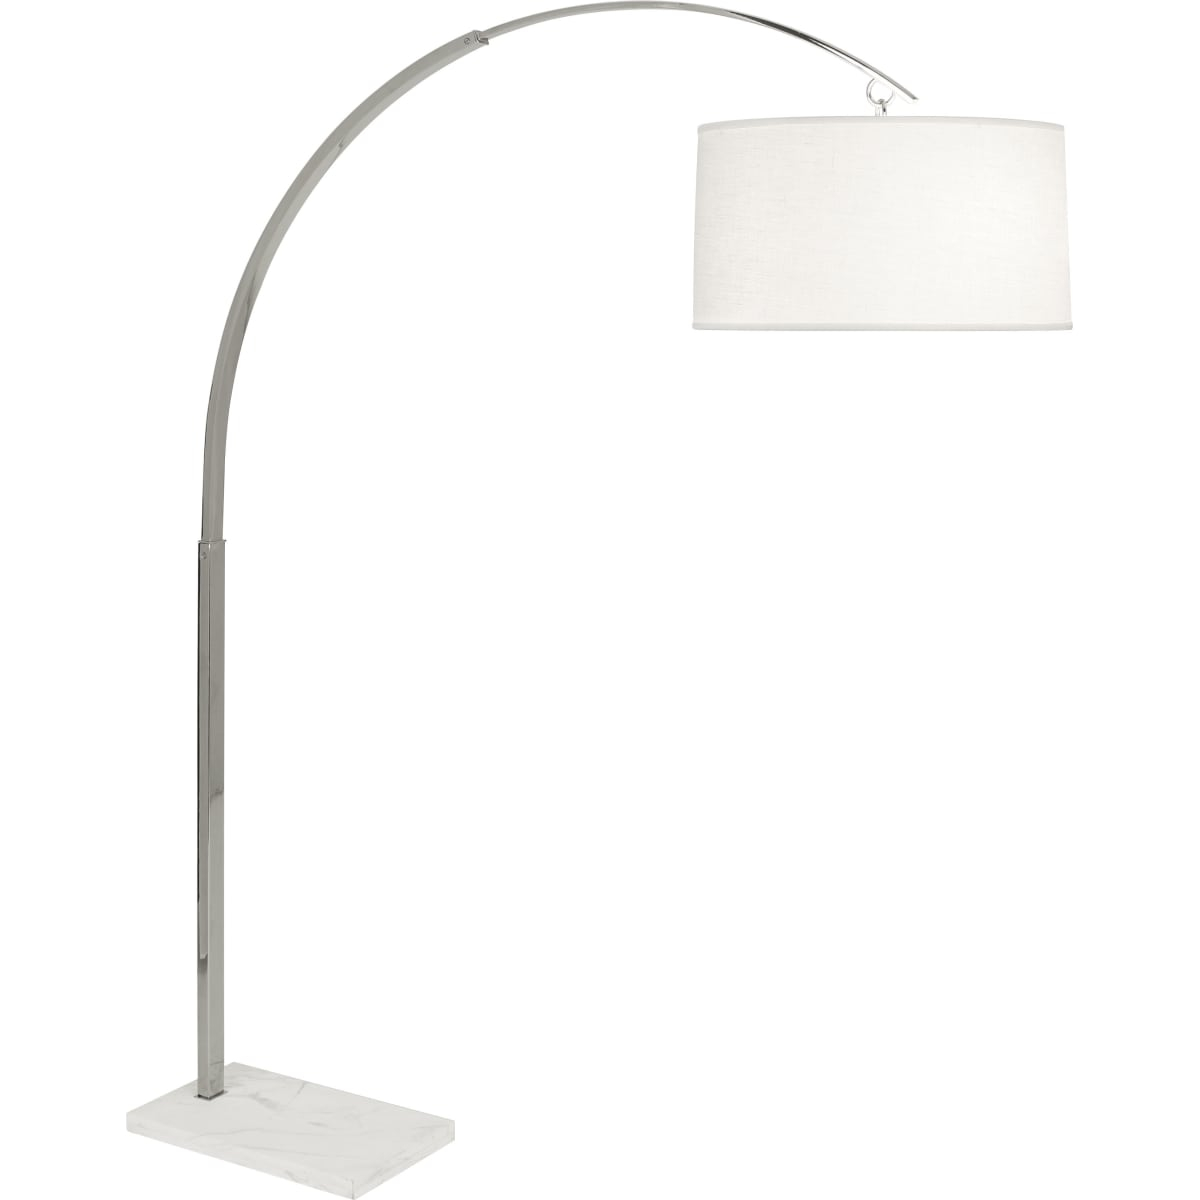 Lamps Floor Lamps Uk Arc Floor Lamps Near Me Basque Arc pertaining to size 1200 X 1200